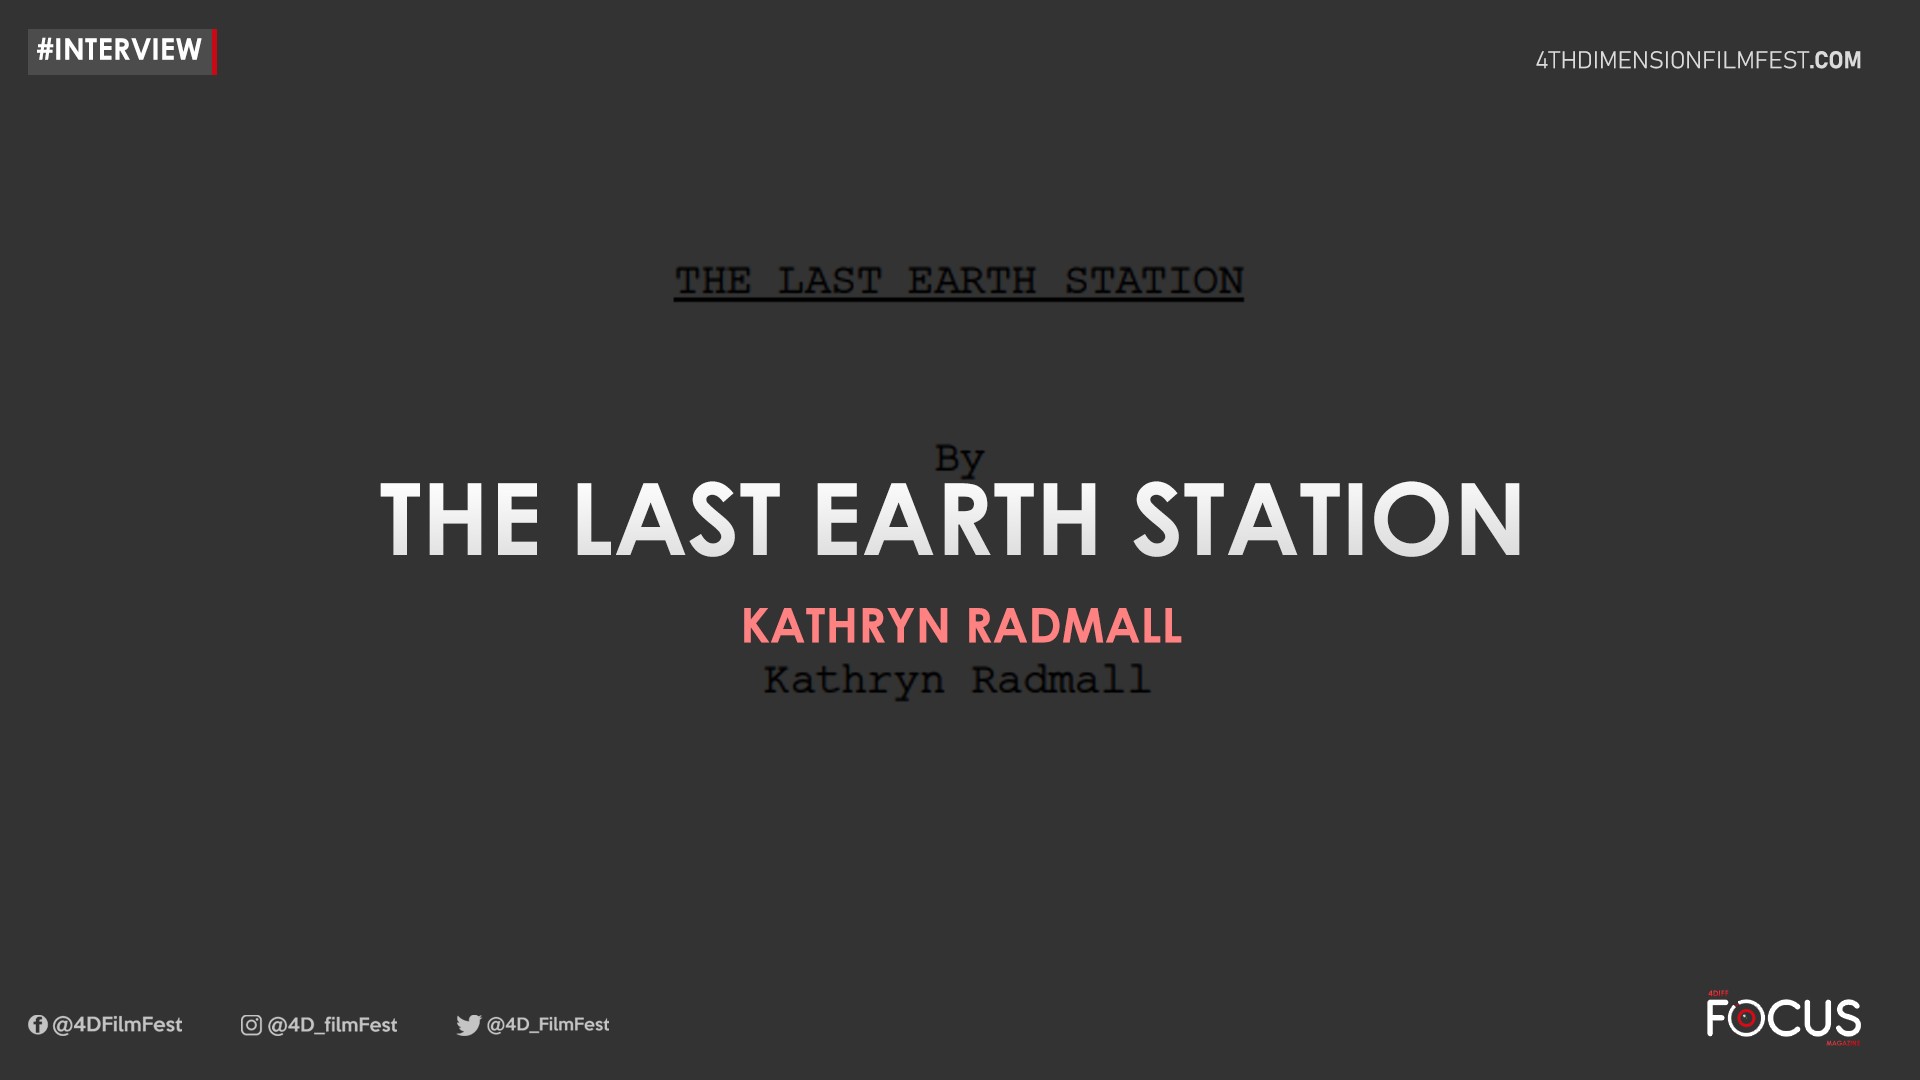 The Last Earth Station